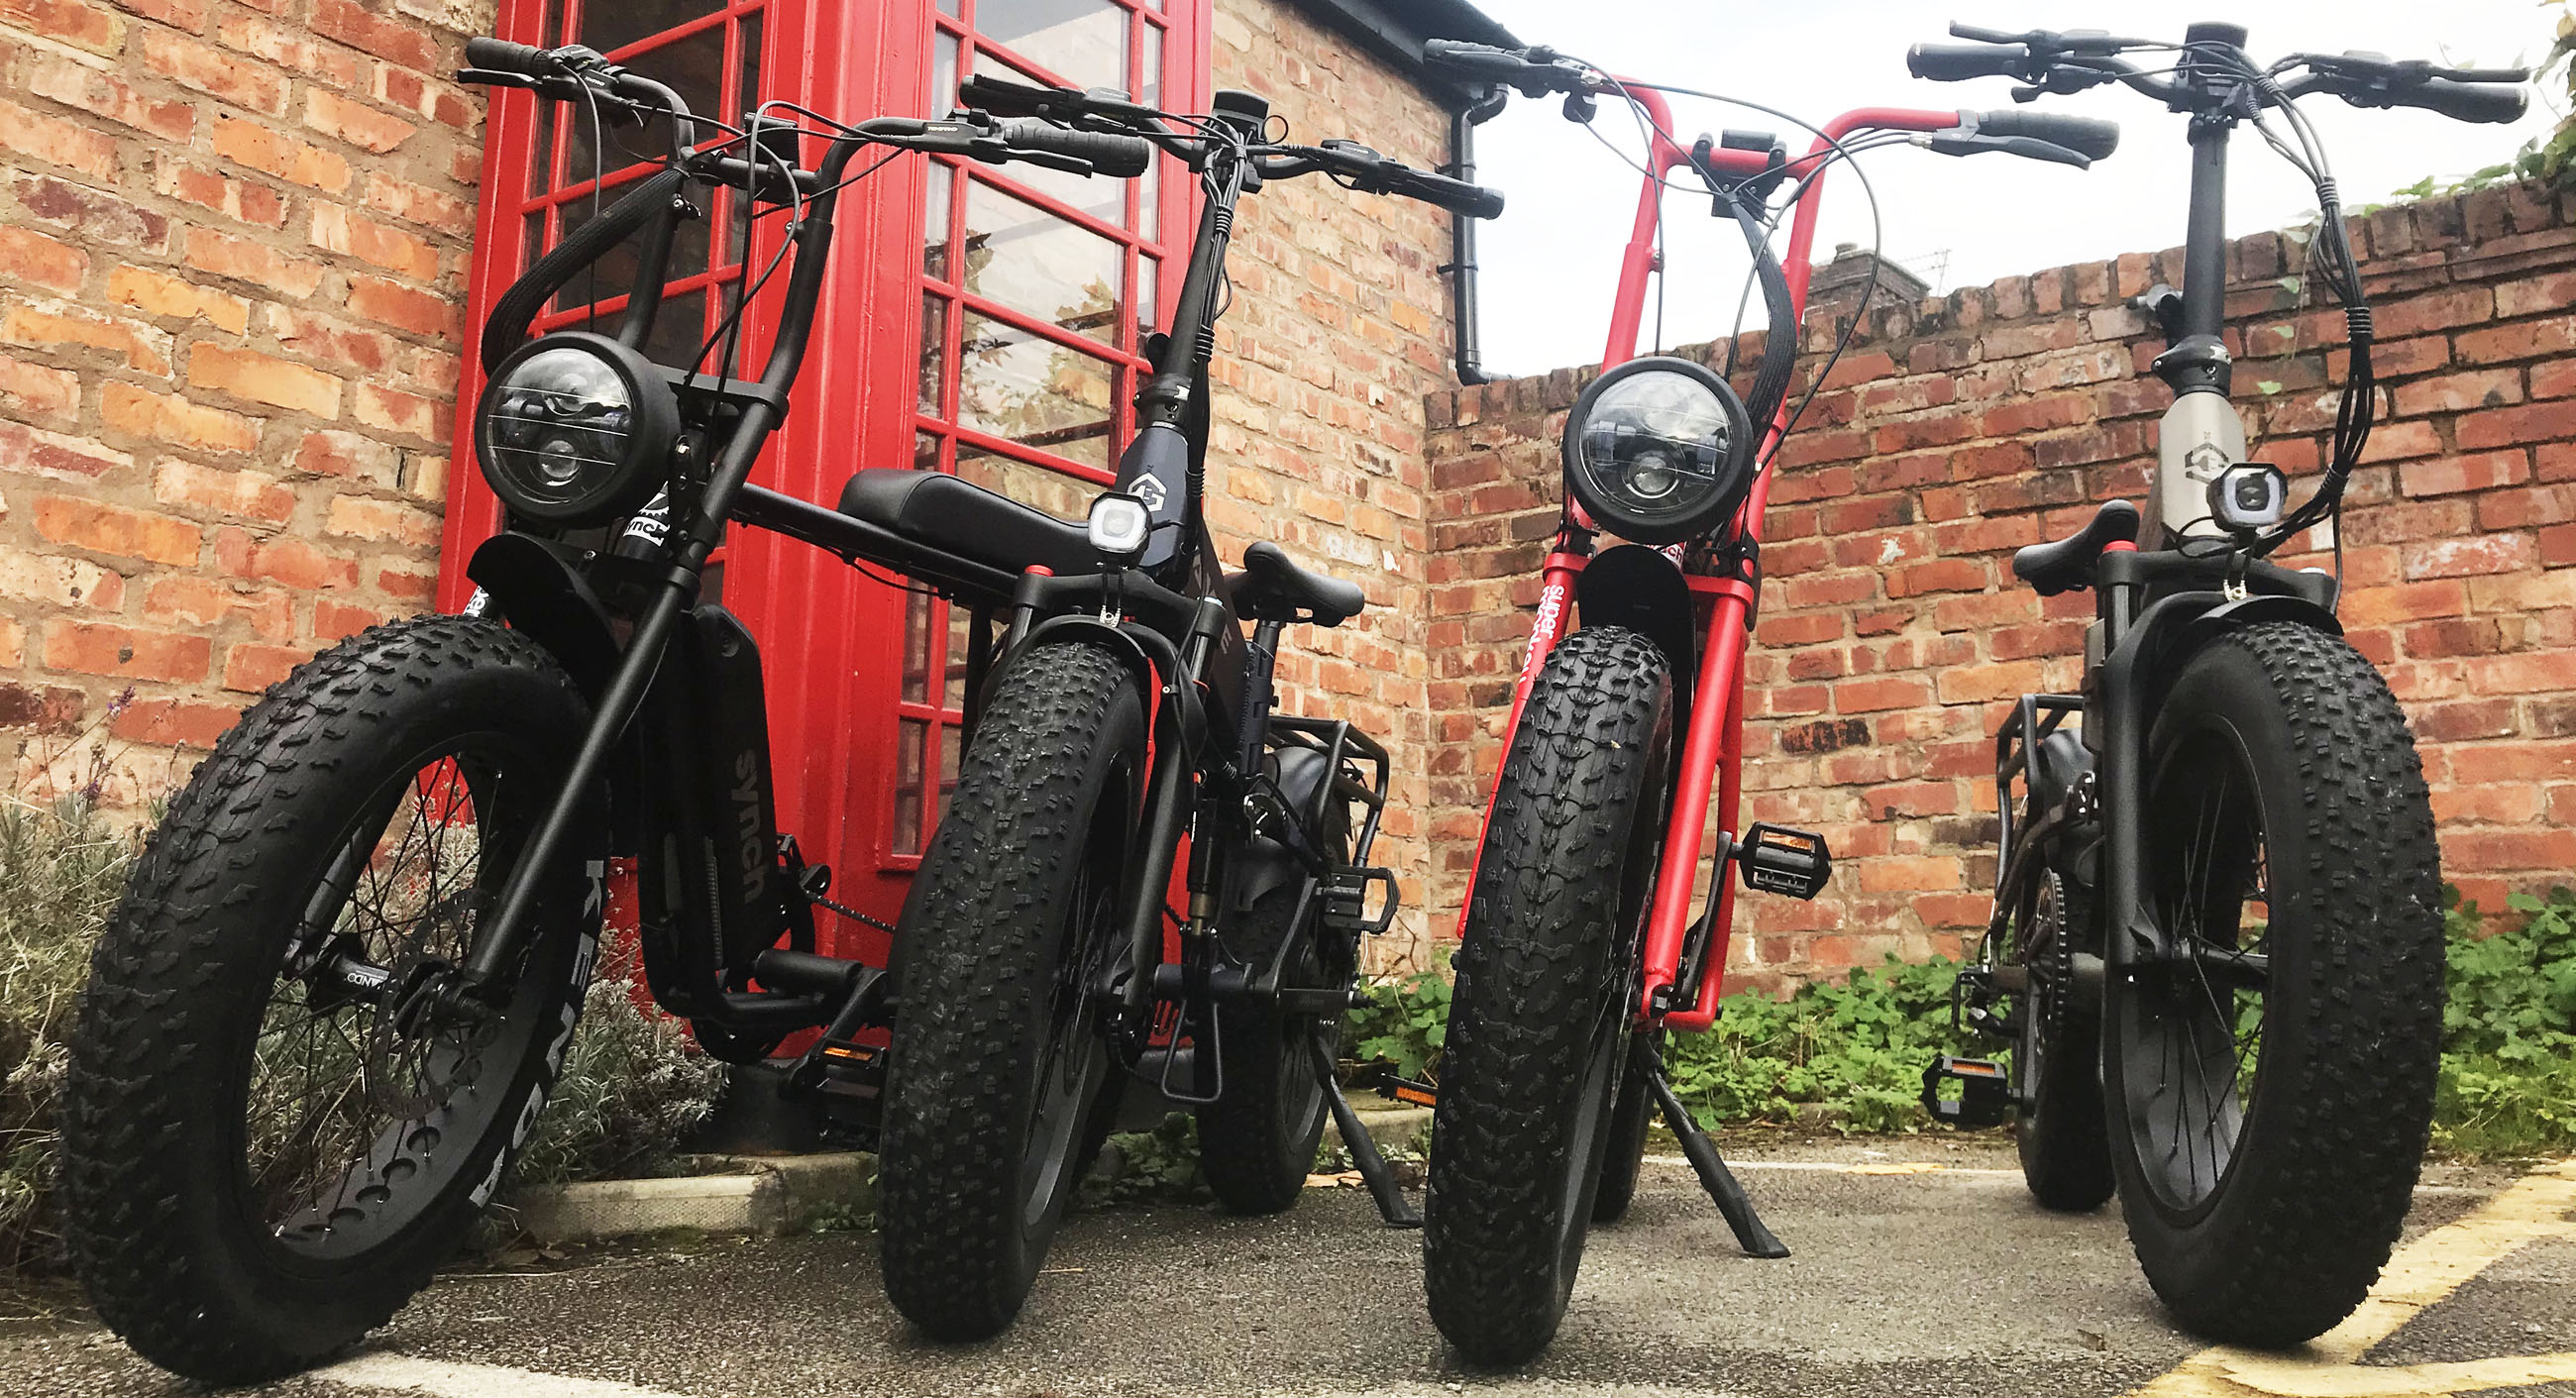 EBike for Sale Manchester